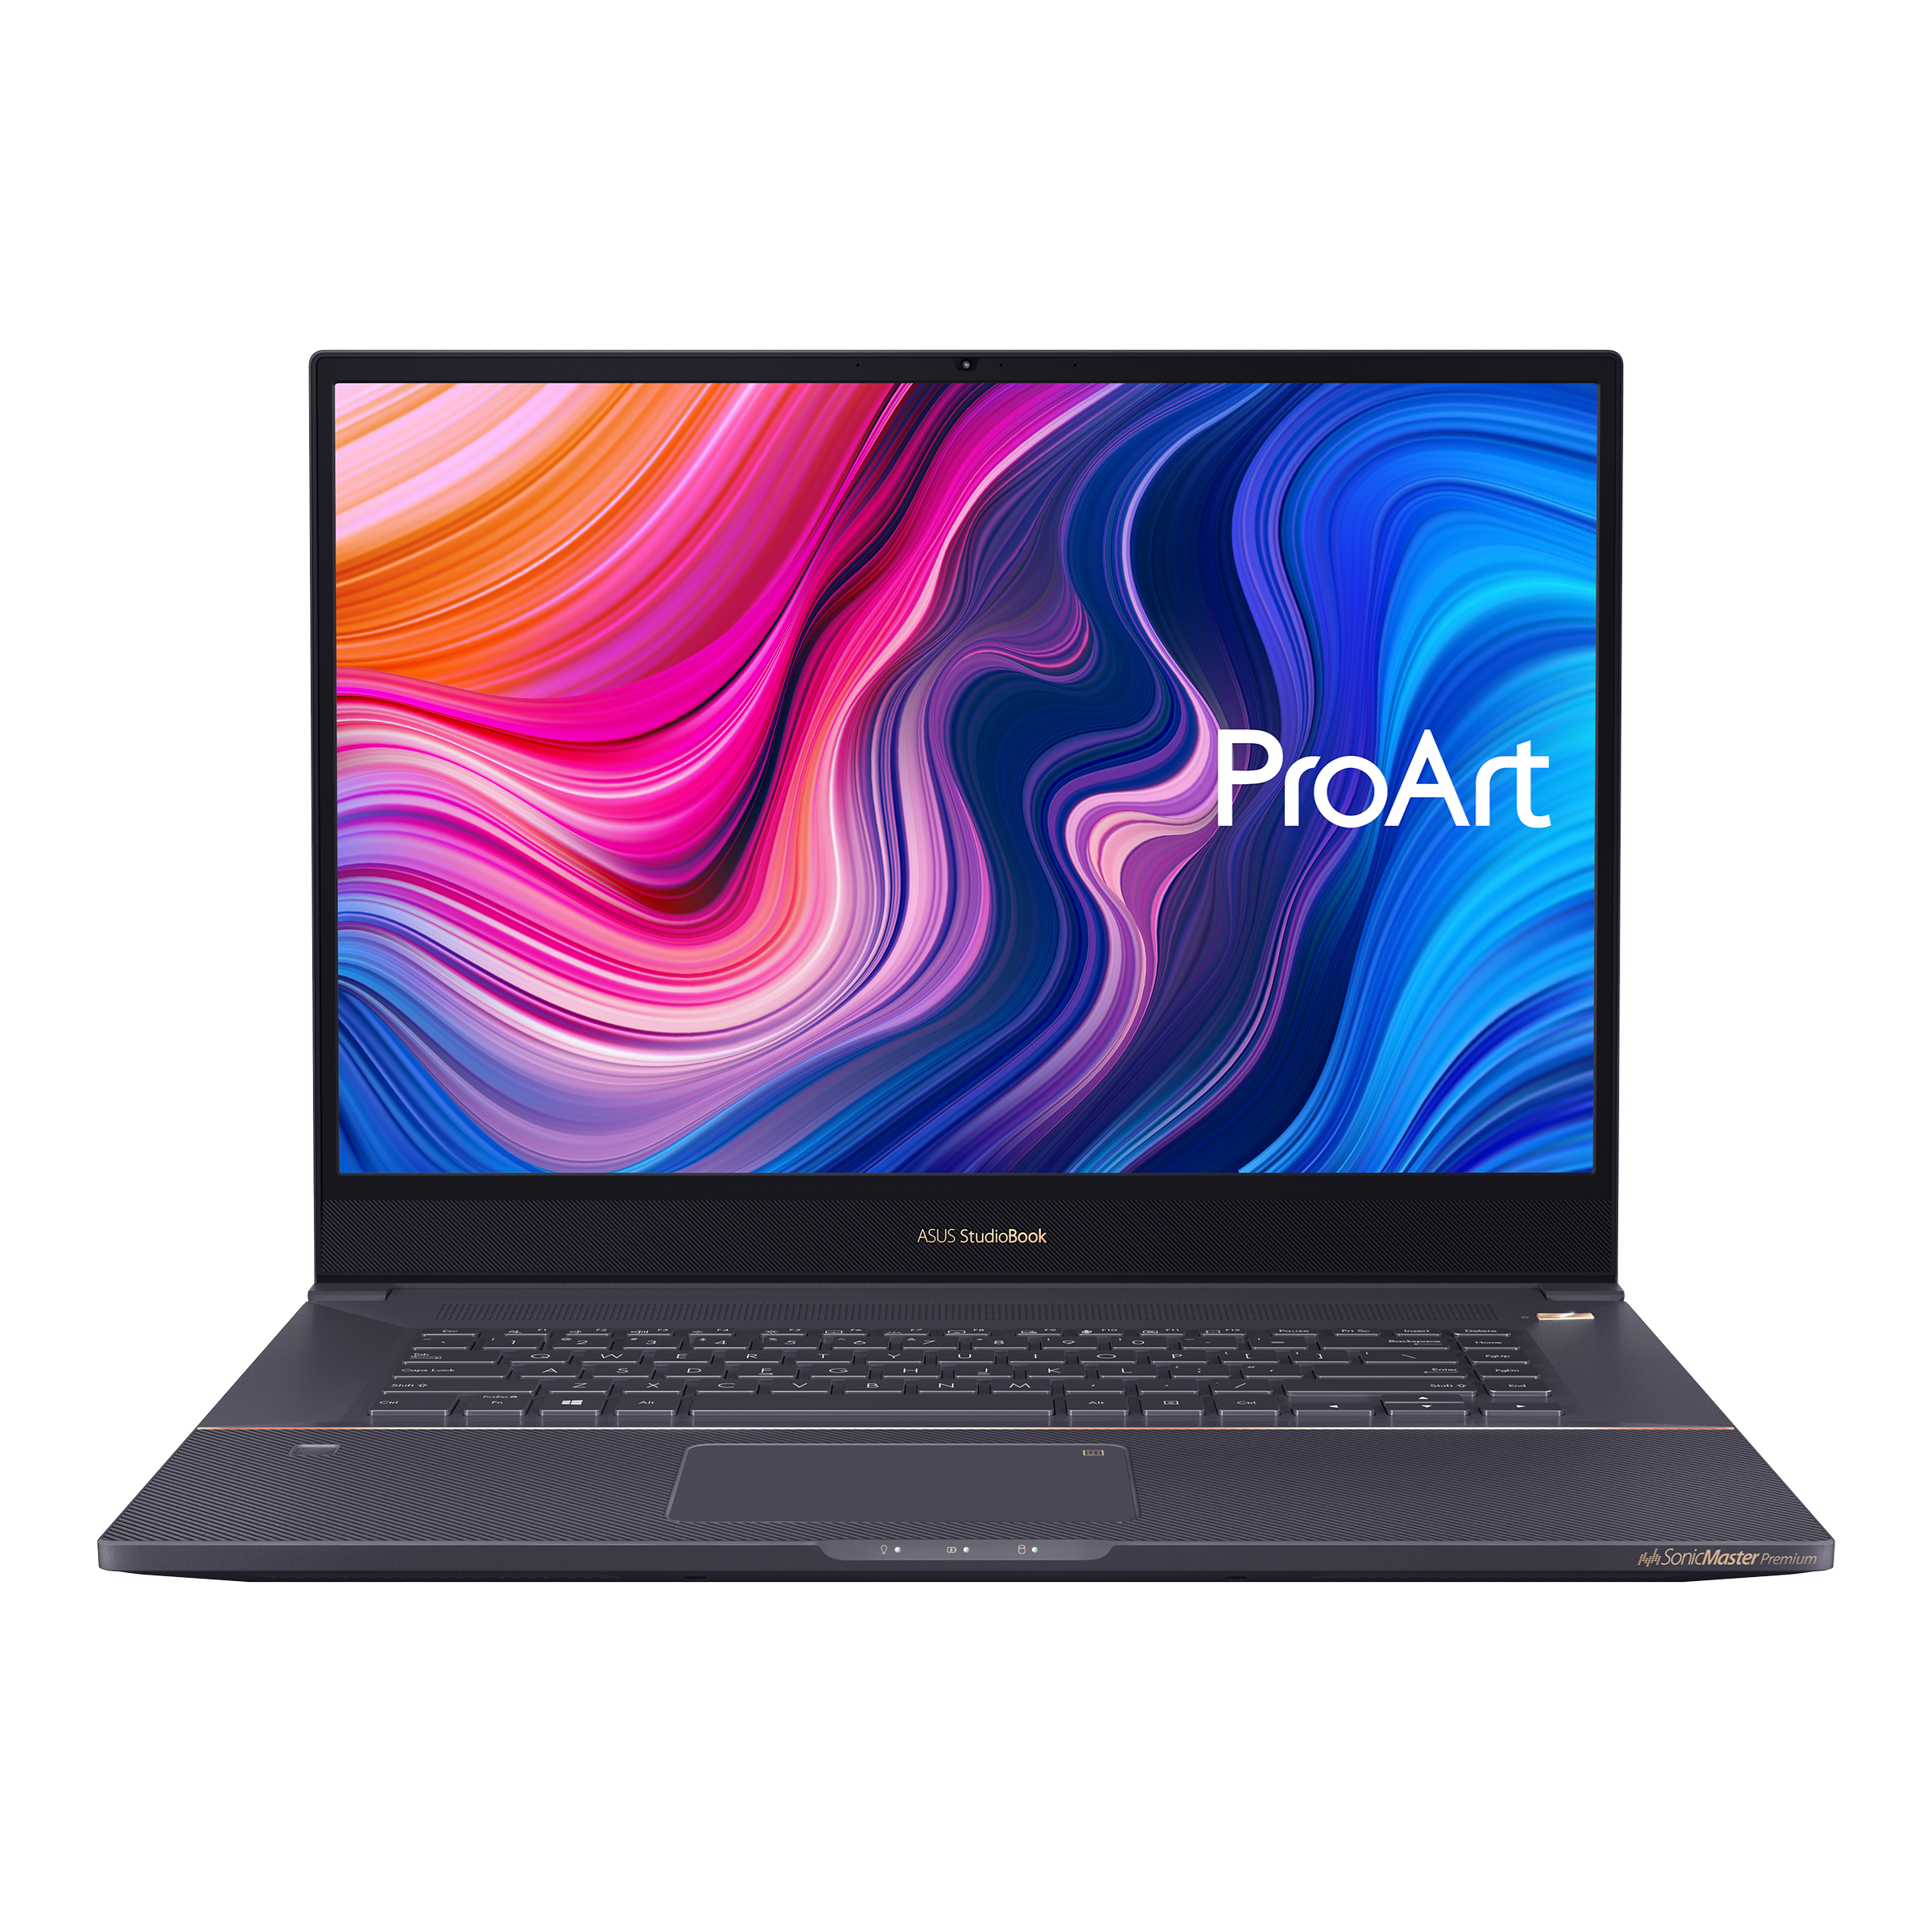 laptop model and prices